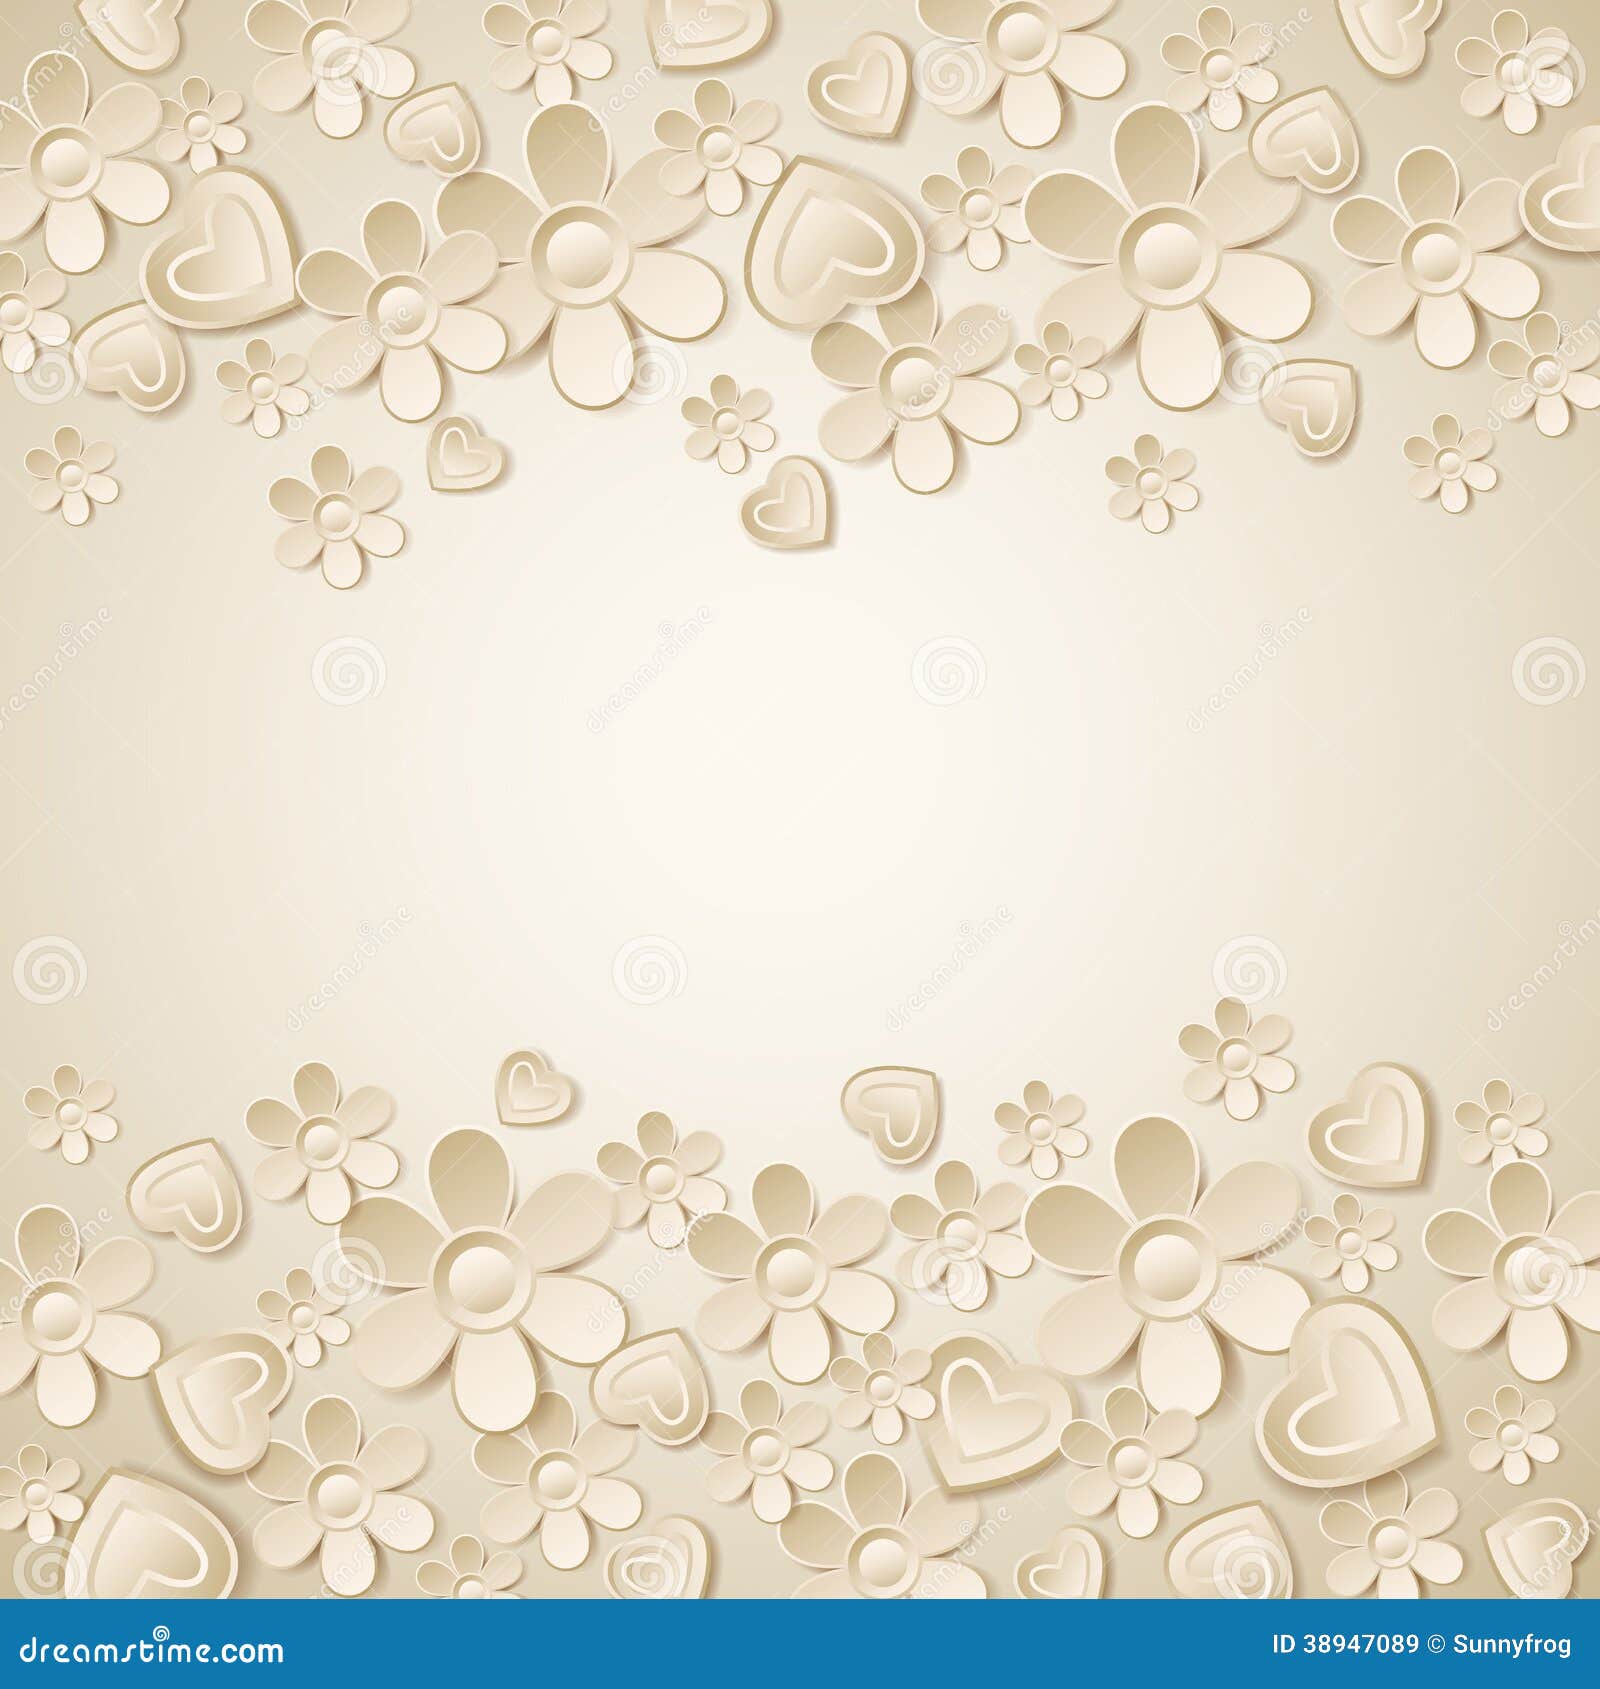 Beige Valentine Background With Many Flowers Stock Vector - Image: 38947089